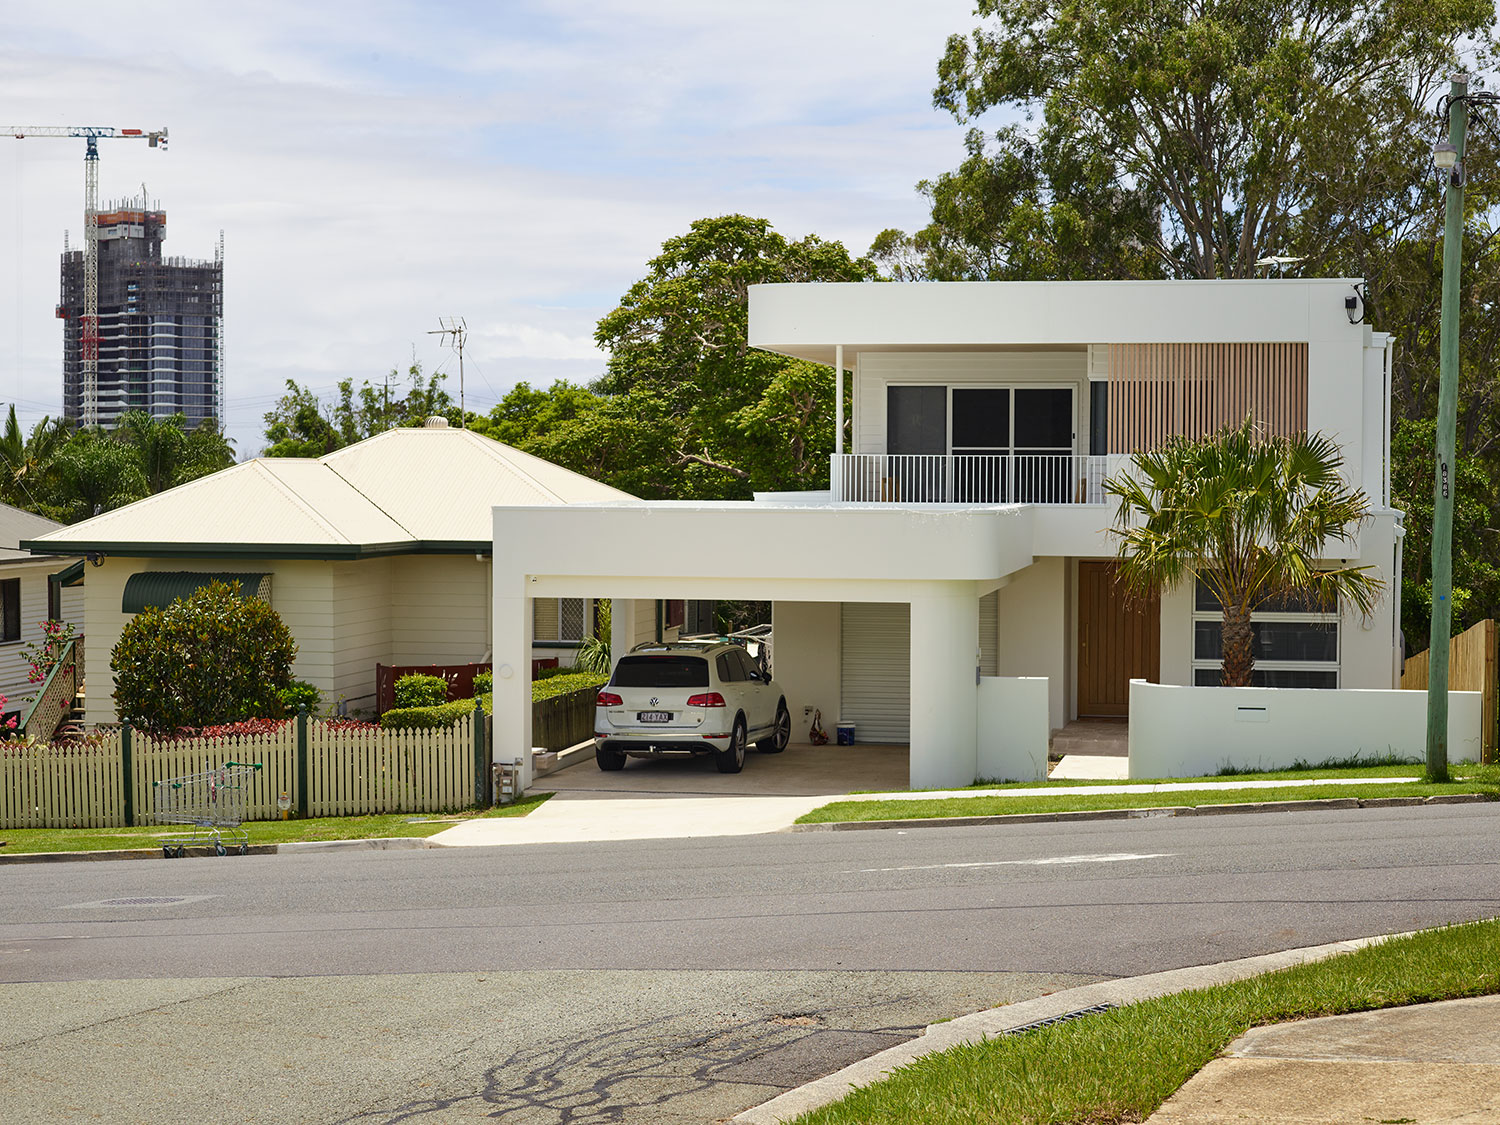 New modern home builds are transforming selected Southport streetscapes 